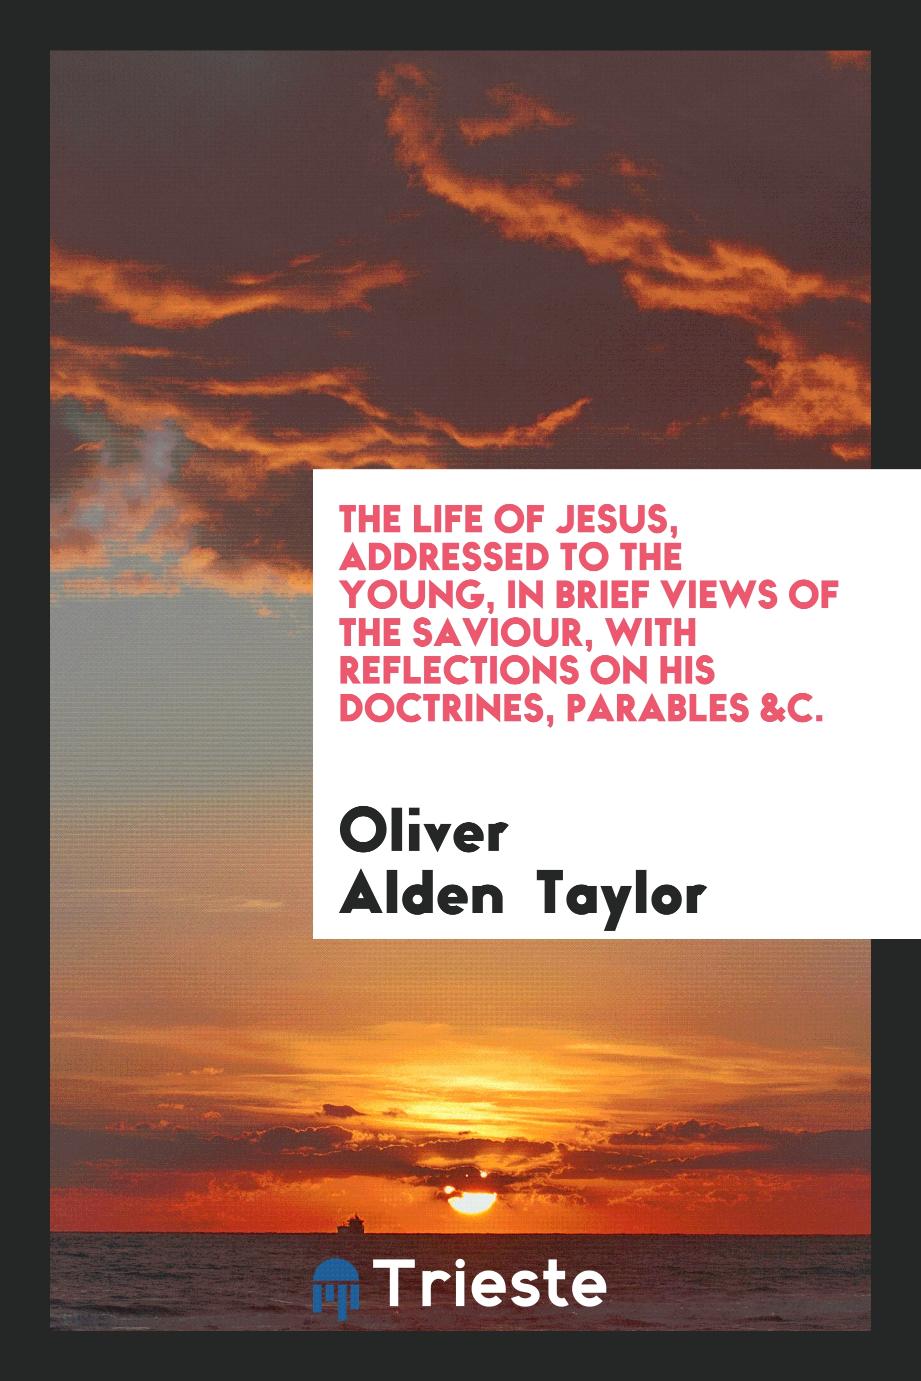 The Life of Jesus, Addressed to the Young, in Brief Views of the Saviour, with Reflections on His Doctrines, Parables &c.